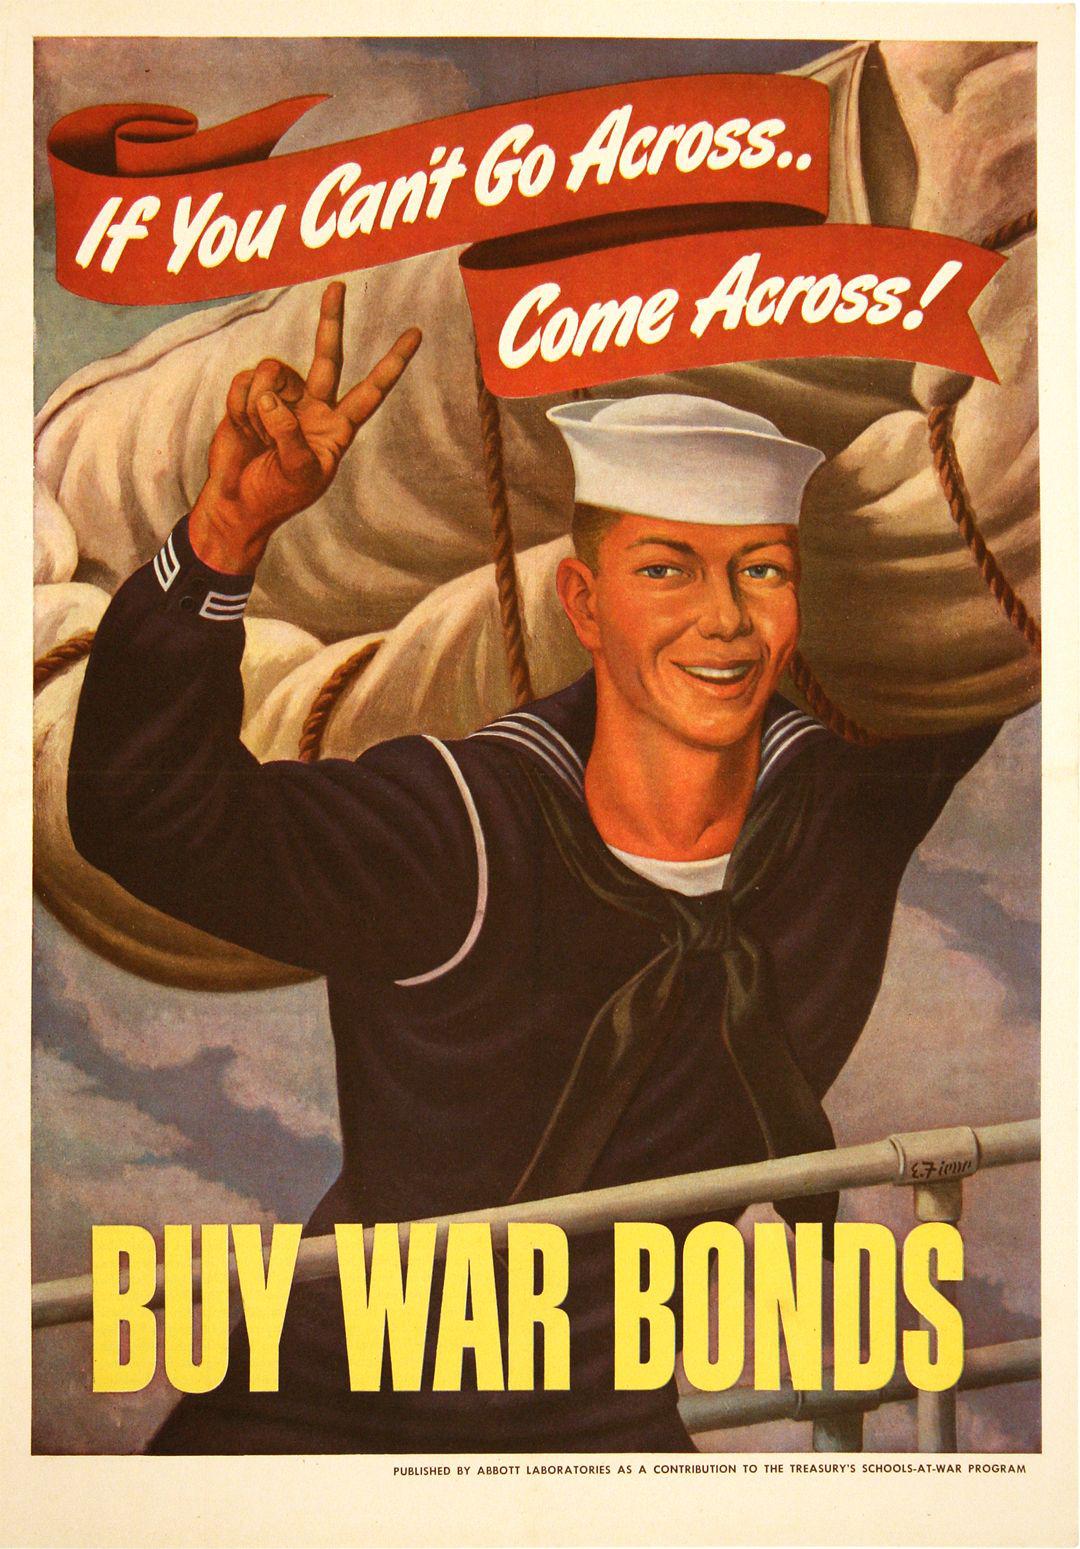 Original World War II Poster 1943 for Abbott Labs - If You Can't Go Across Come Across by Ernest Fiene